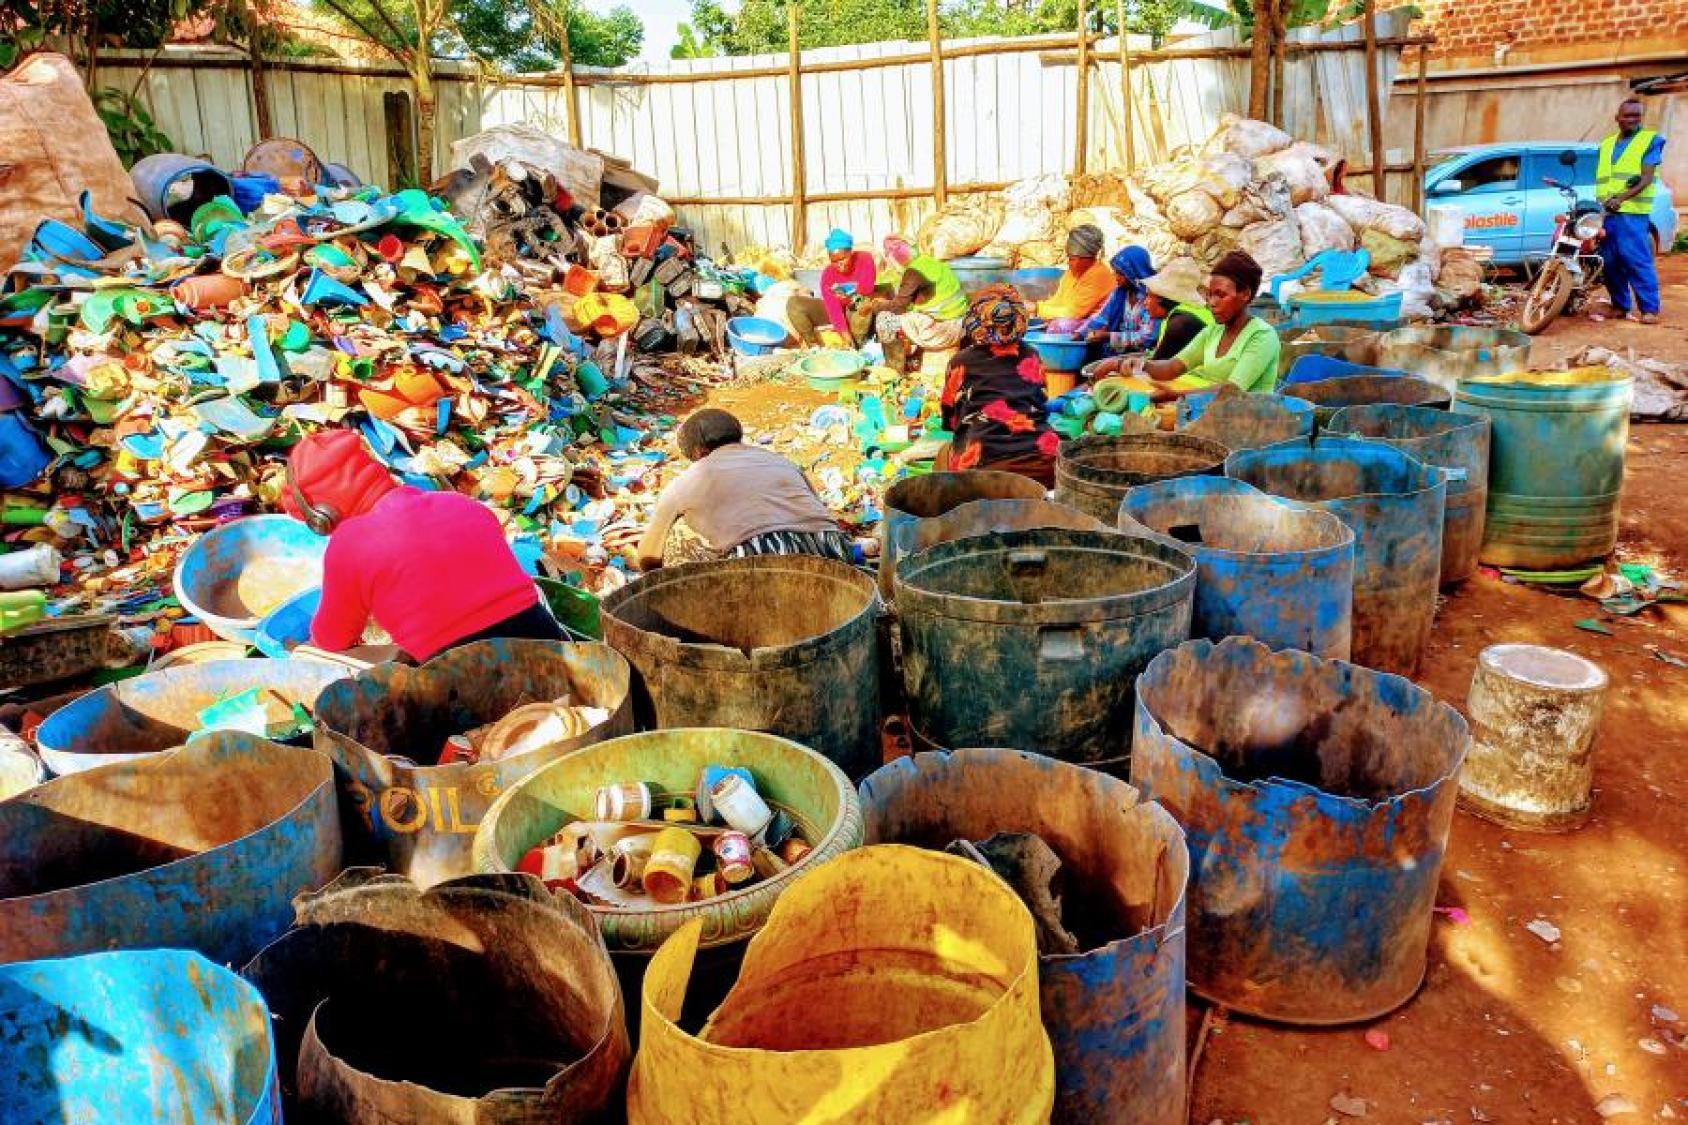 A group of women sorting waste.